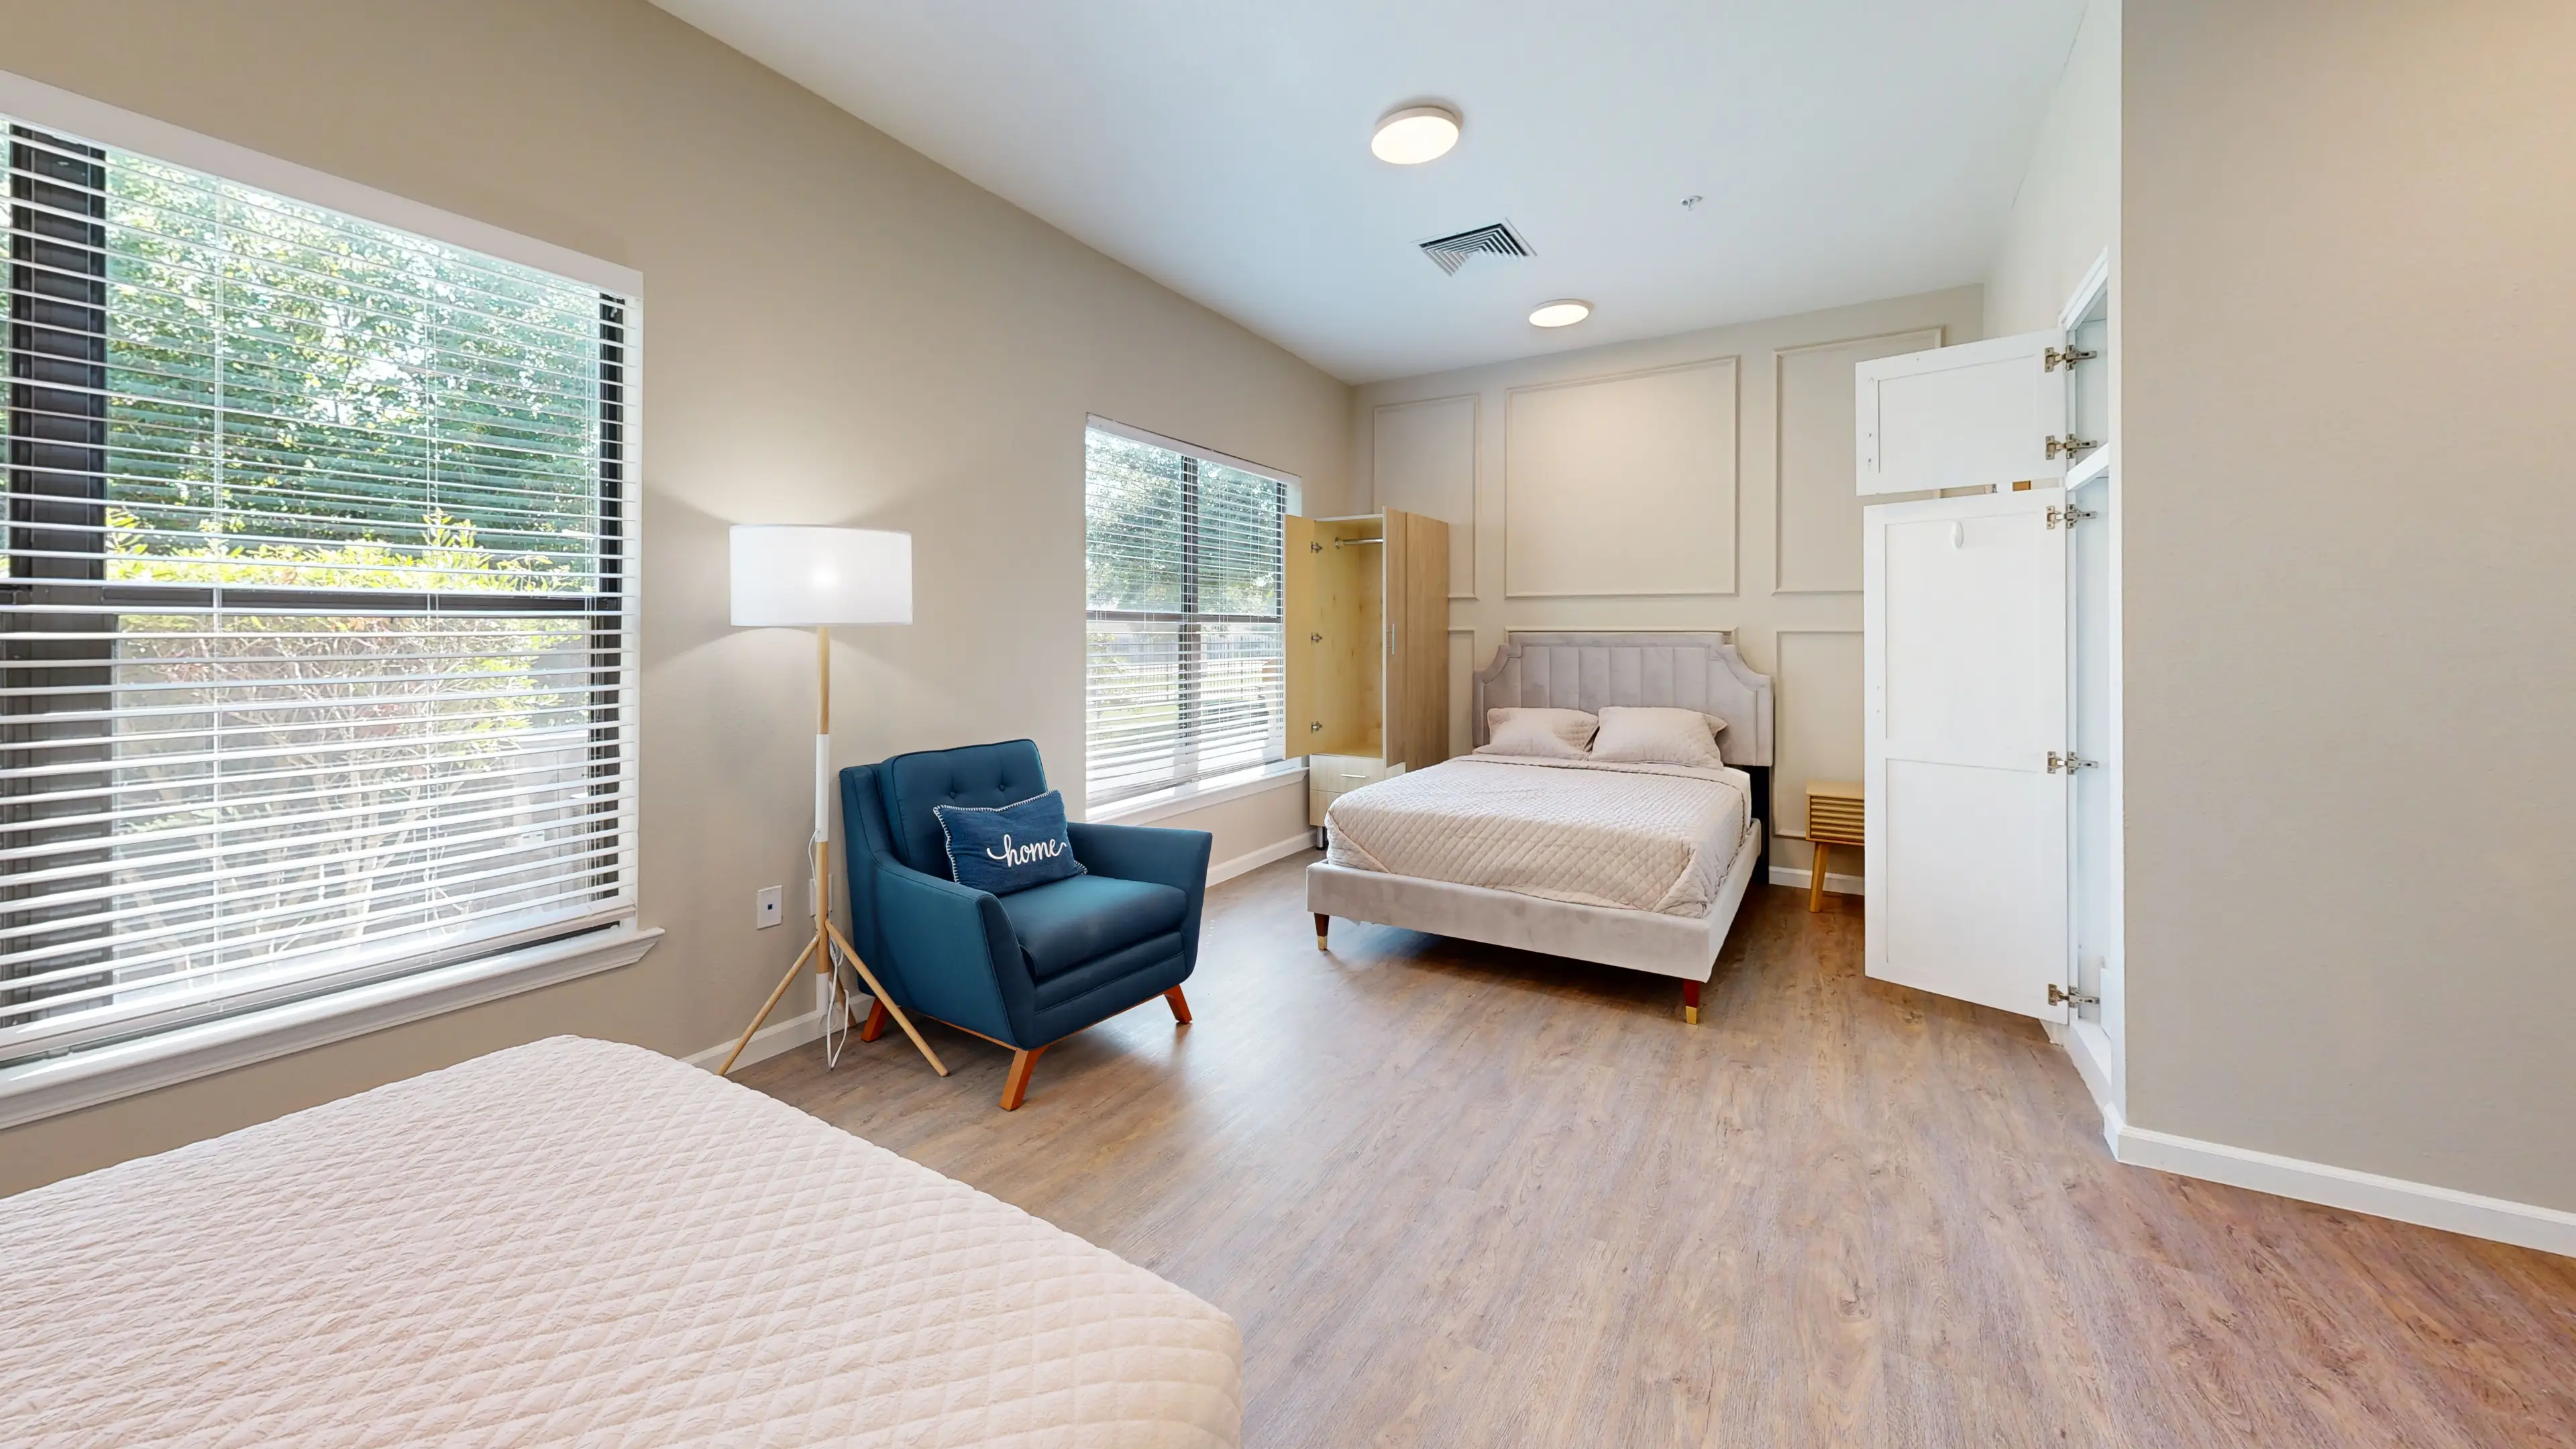 Auberge at Onion Creek Memory Care 1 Bed 1 Bath Bedroom